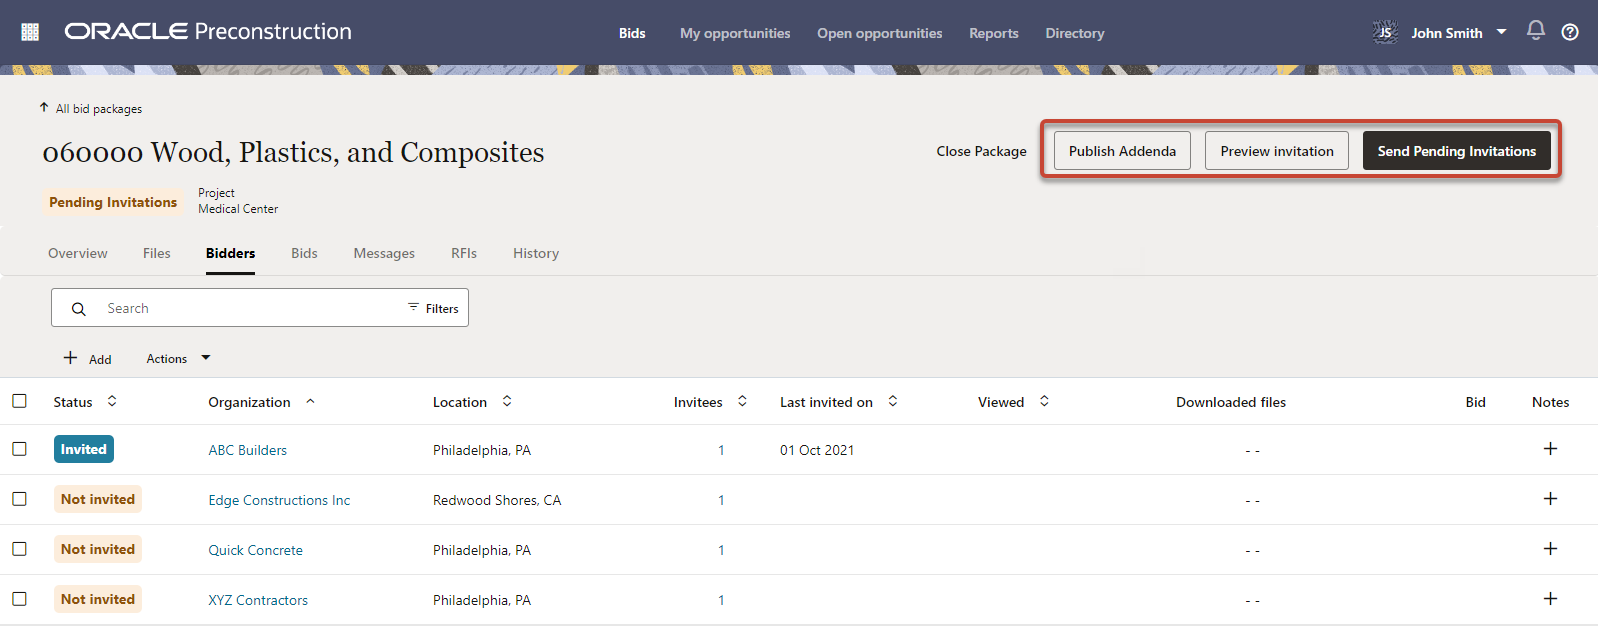 A screen shot of a bid package's details. Buttons are present to publish addenda and send pending invitations.